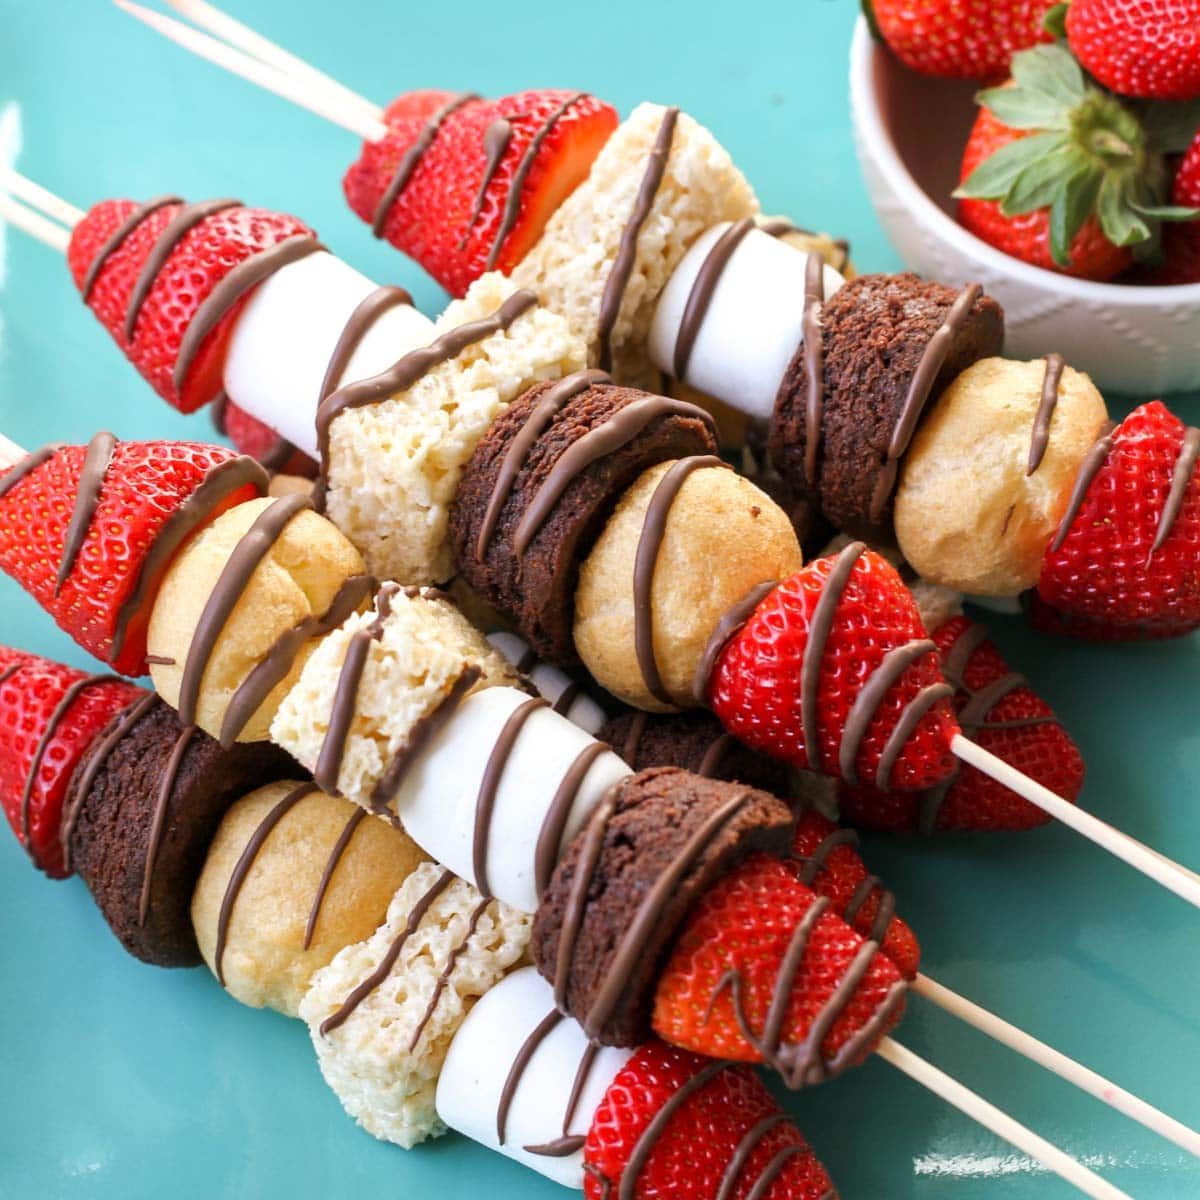 Thanksgiving desserts - dessert kabobs filled with fresh strawberries and treats.